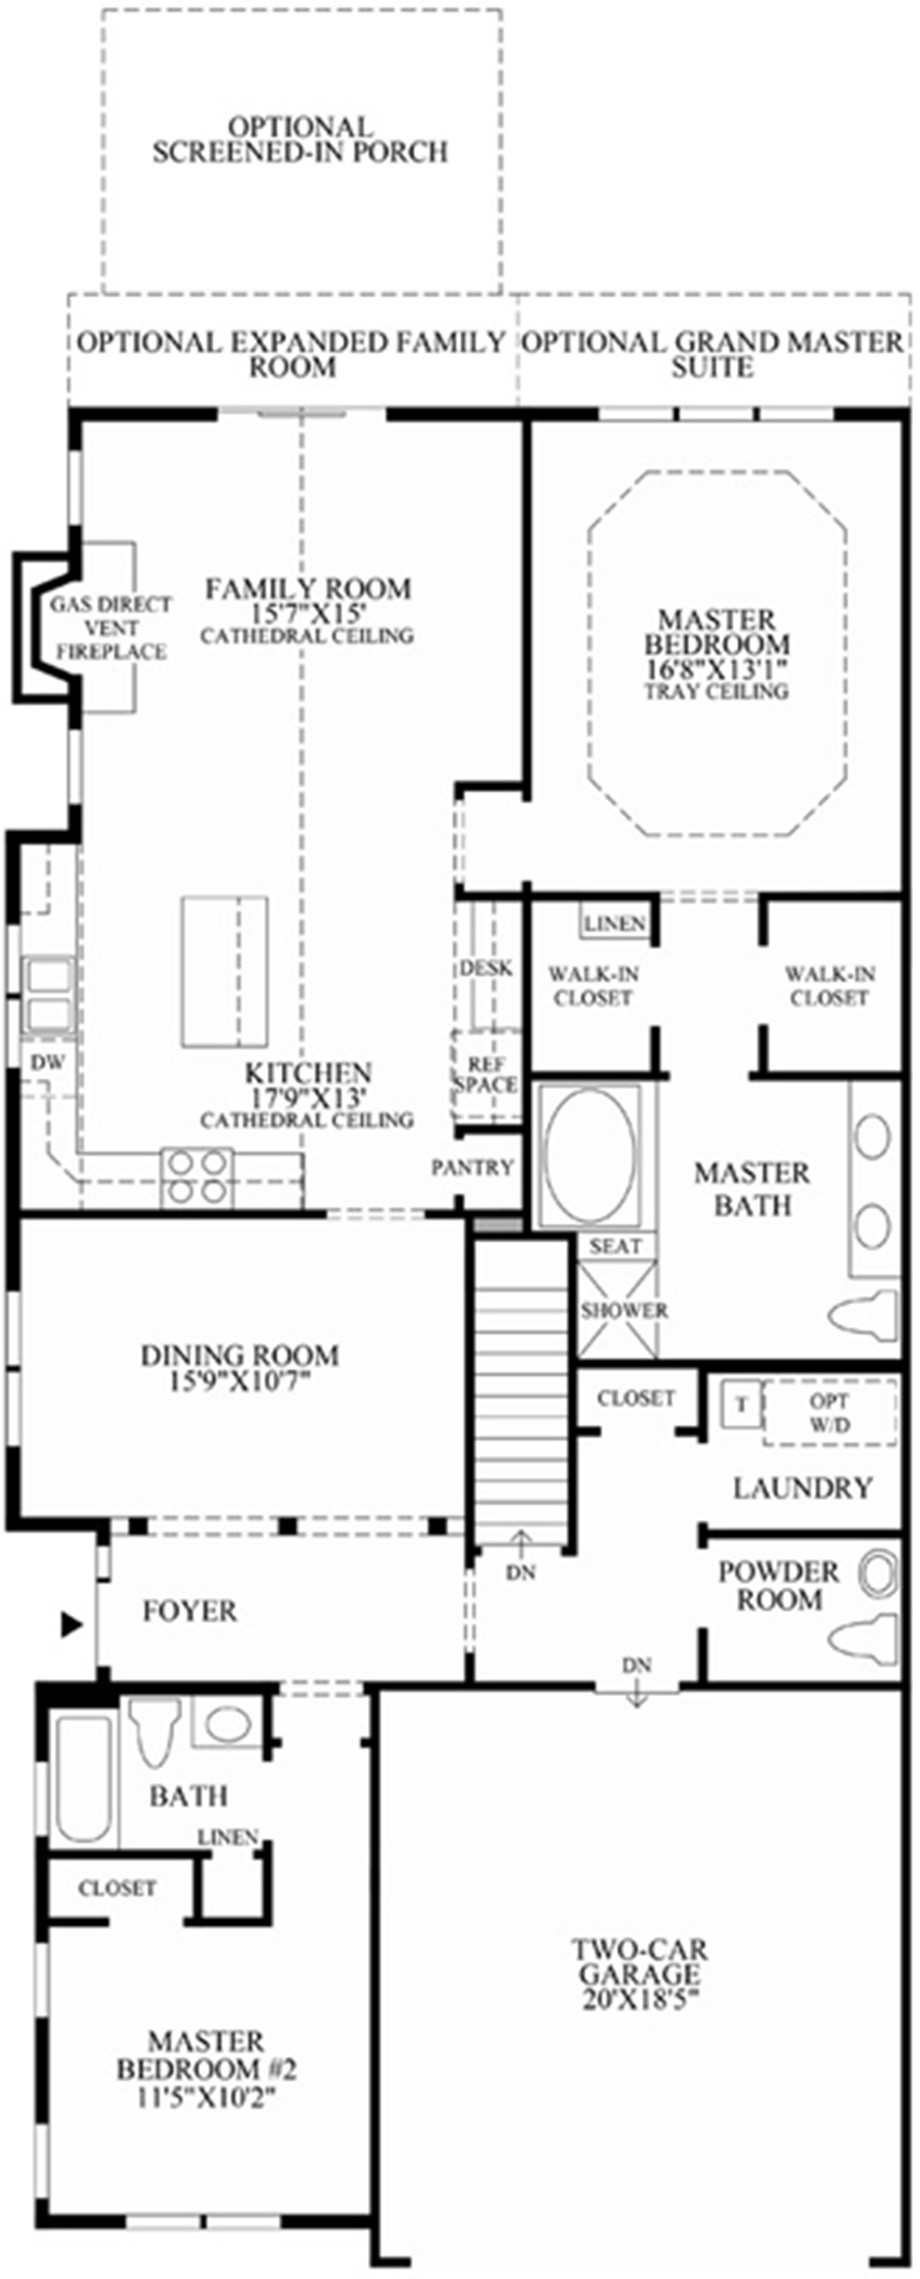 Bedroom Closet Dimensions
 Ideal Master Bedroom Layout With Walk In Closet DB84